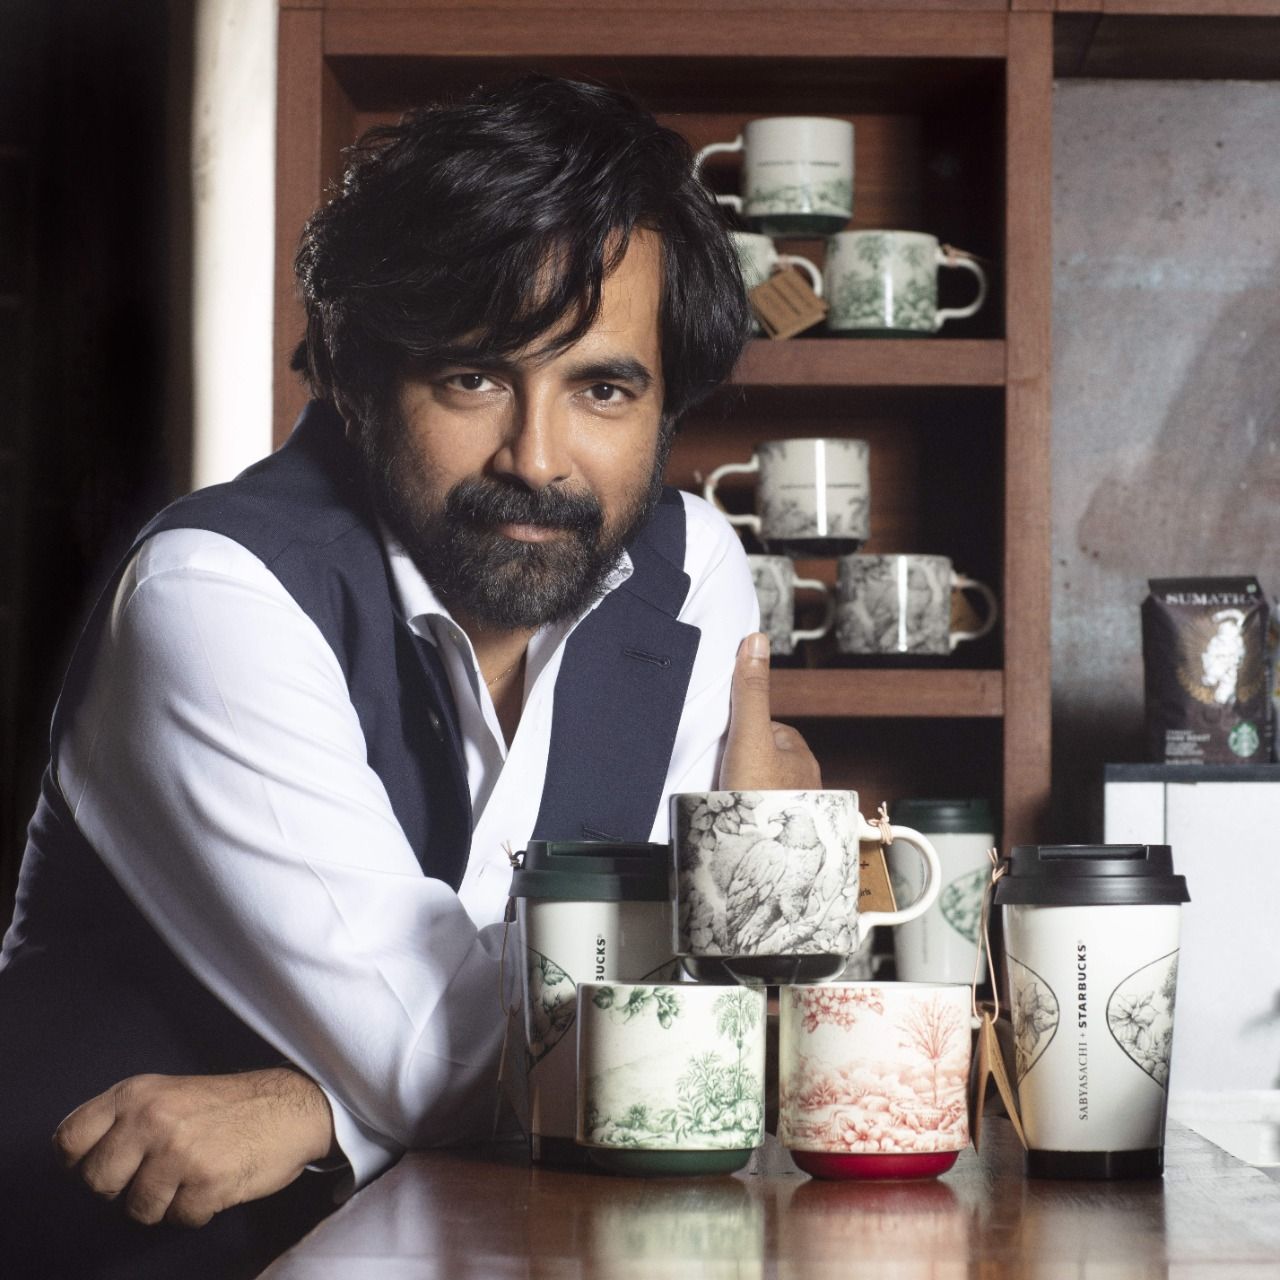 Sabyasachi Mukherjee: “When I held a Starbucks cup in my hand I felt validated, this collaboration is a testimonial to how far I have arrived!” on the latest Sabyasachi + Starbucks merchandise